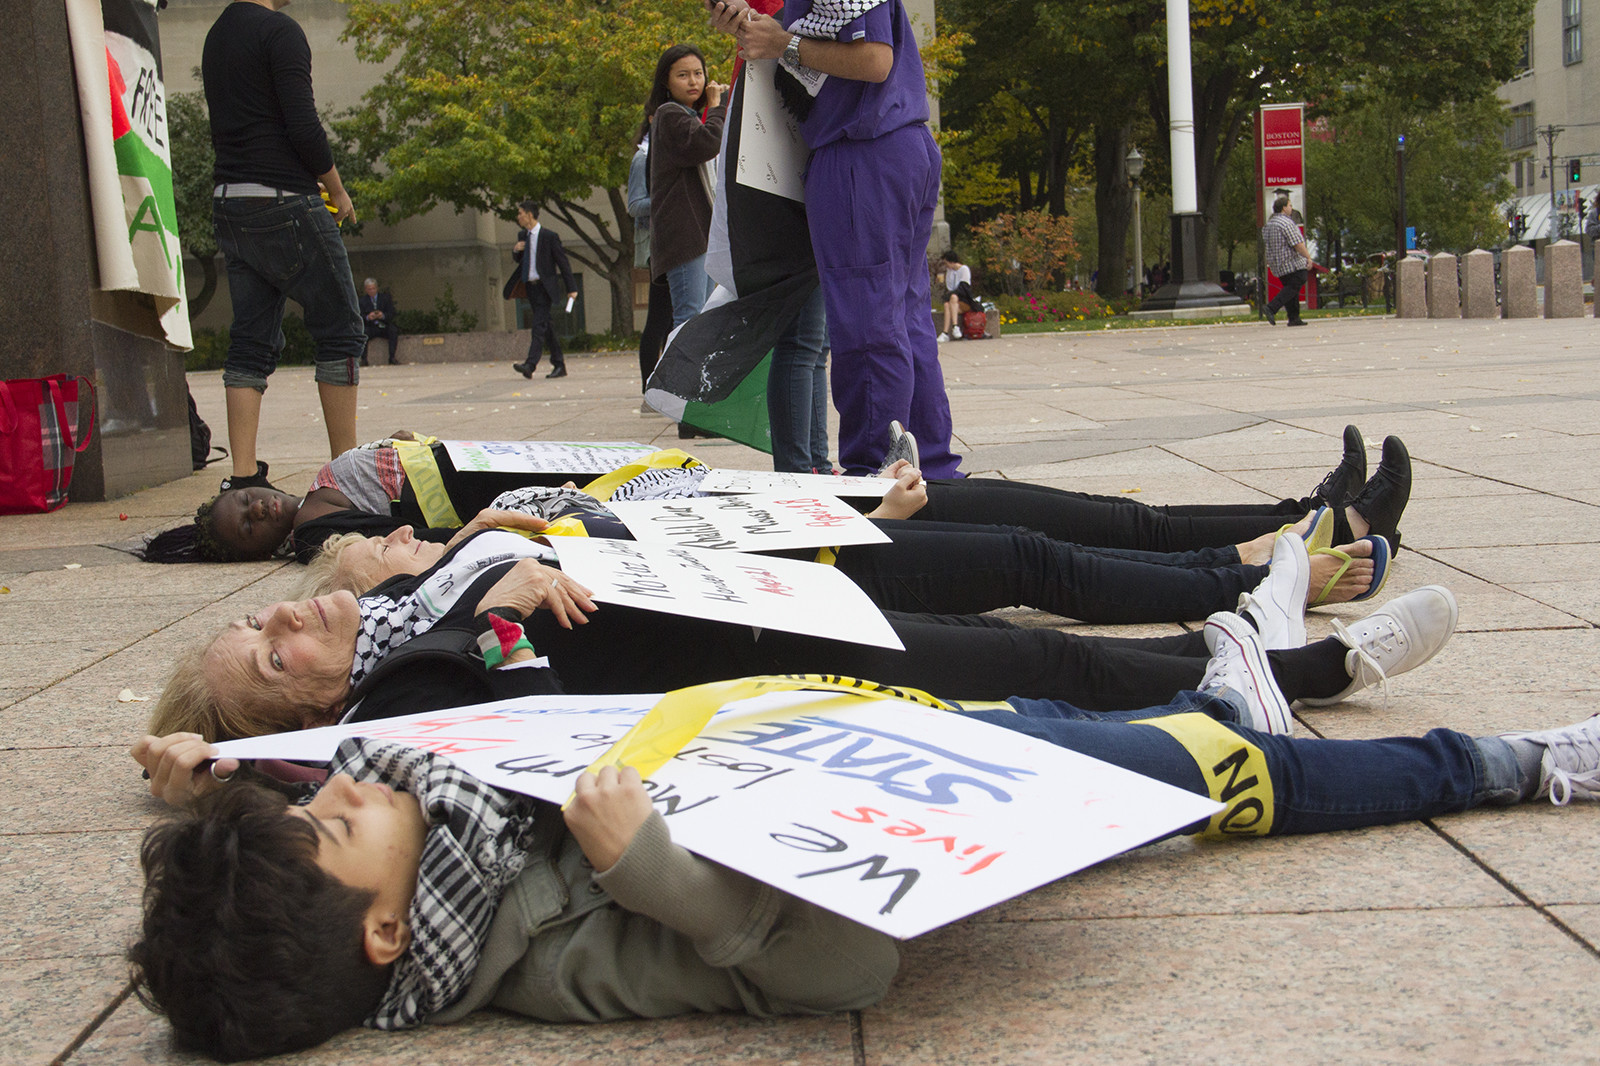 Students for Justice in Palestine held a die-in at Marsh Plaza Thursday afternoon in response to Boston University Students for Israel's "Vigil for Victims of Terrorism" on Oct. 16. PHOTO BY DANIEL GUAN/DAILY FREE PRESS STAFF